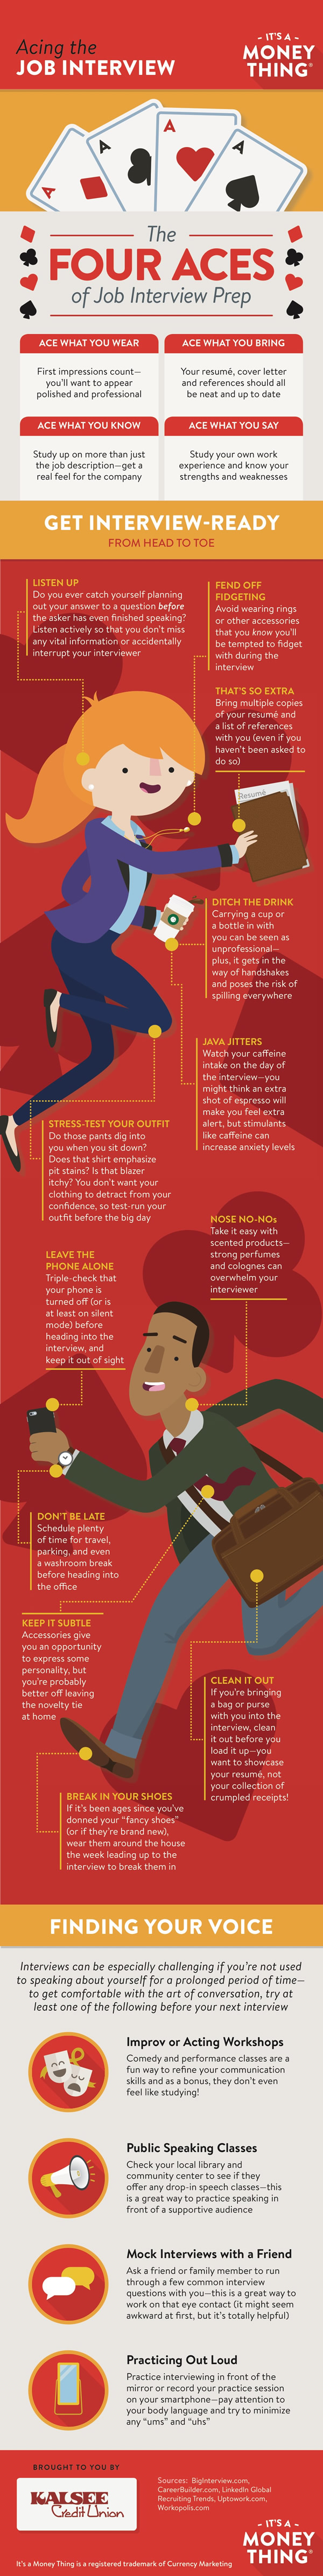 acing the job interview infographic, click for transcription